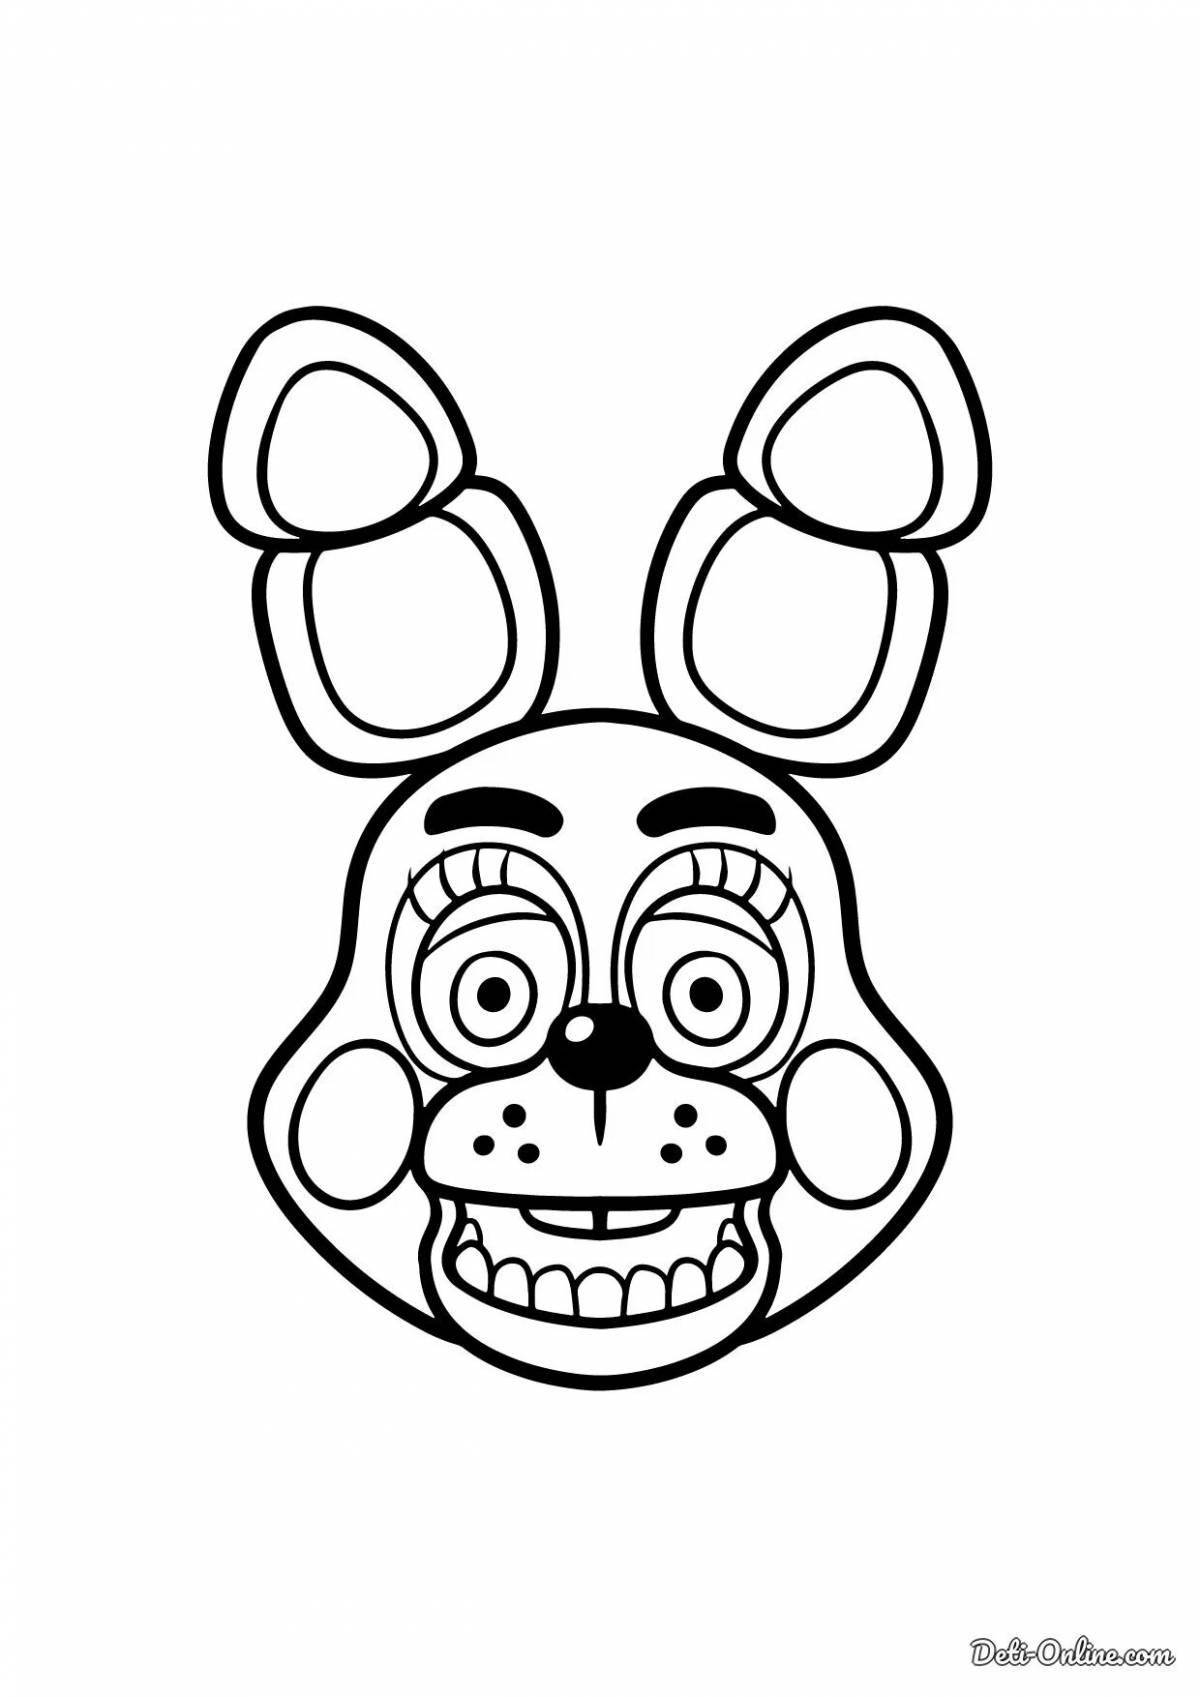 Coloring page charming bonnie fnaf 1